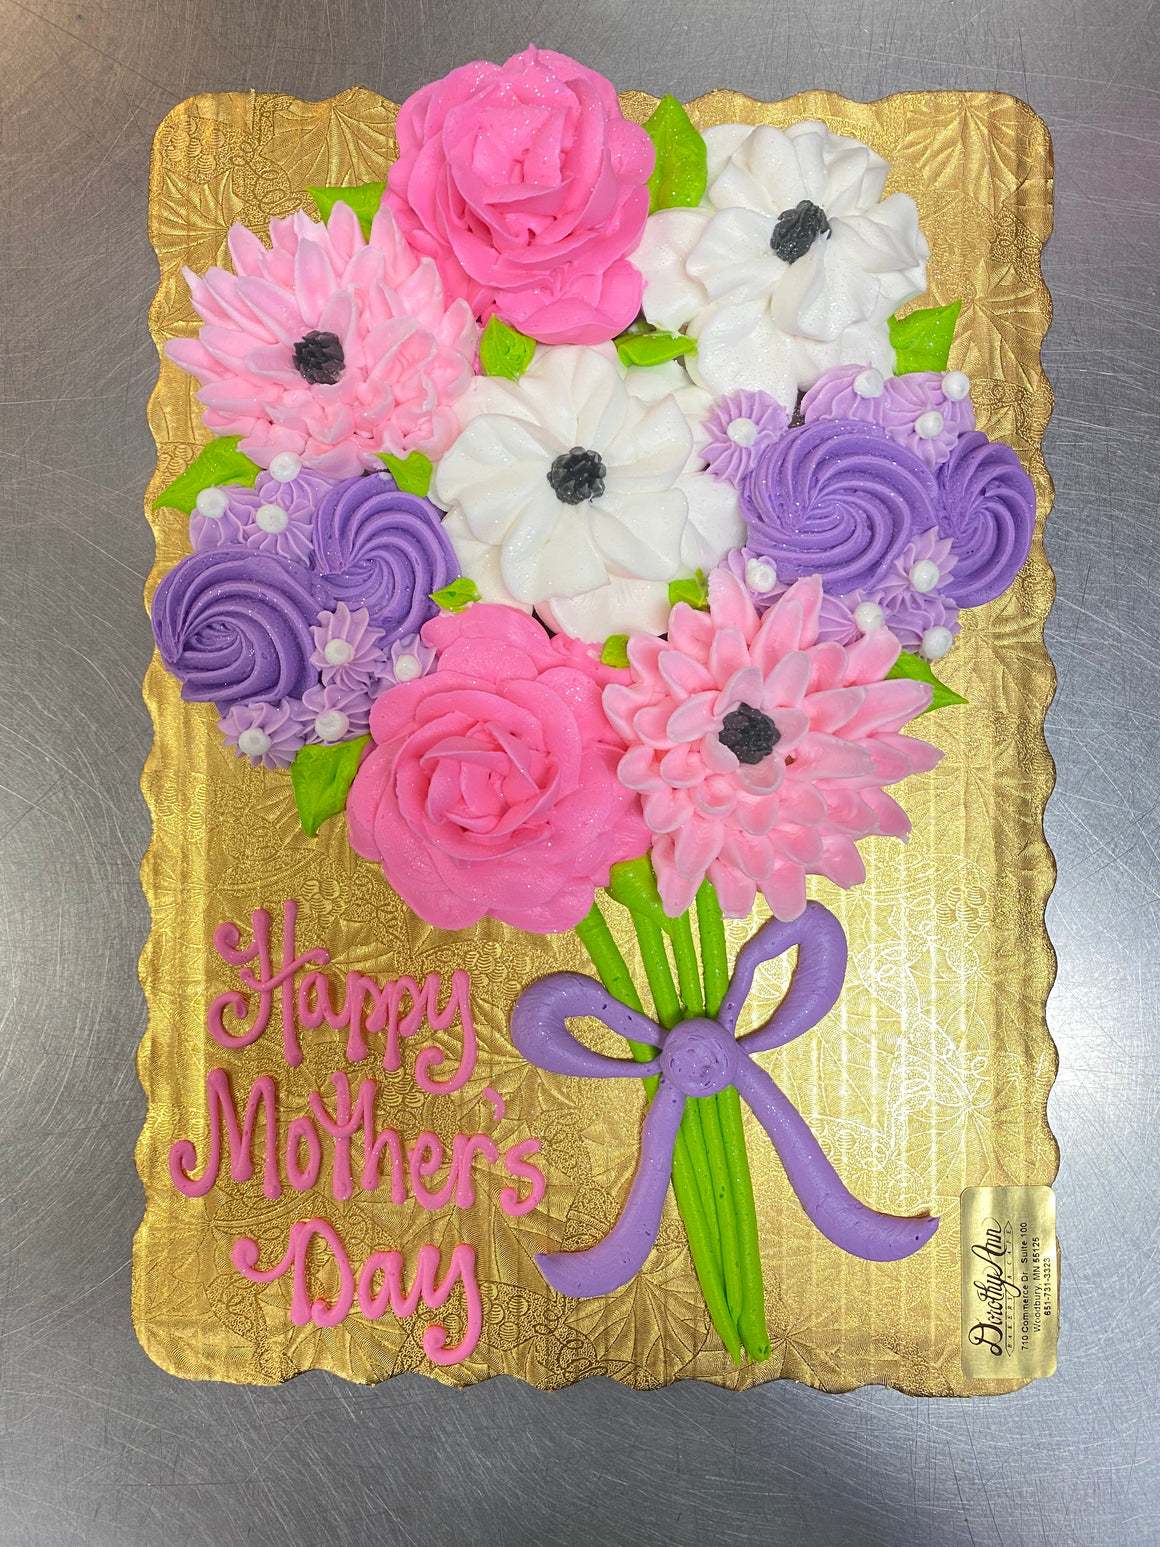 "Mom & Me" Floral Cupcake Bouquet Decorating Class Sun. May 5th 3:00-4:00pm